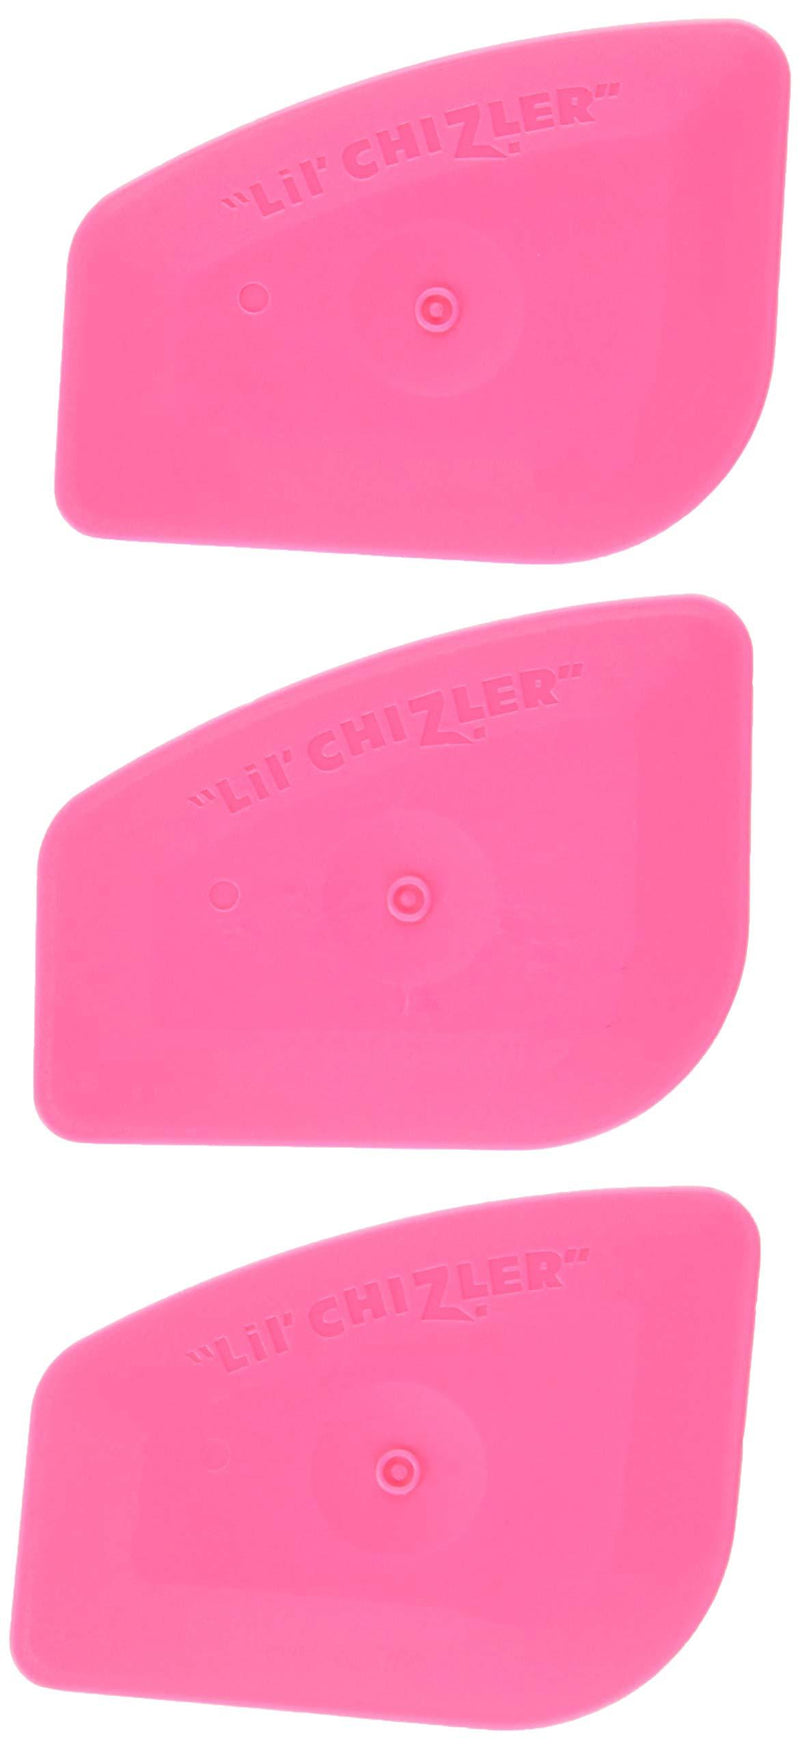  [AUSTRALIA] - Lil Chizler, Decal Remover. Label and Sticker Remover, 3 Pack